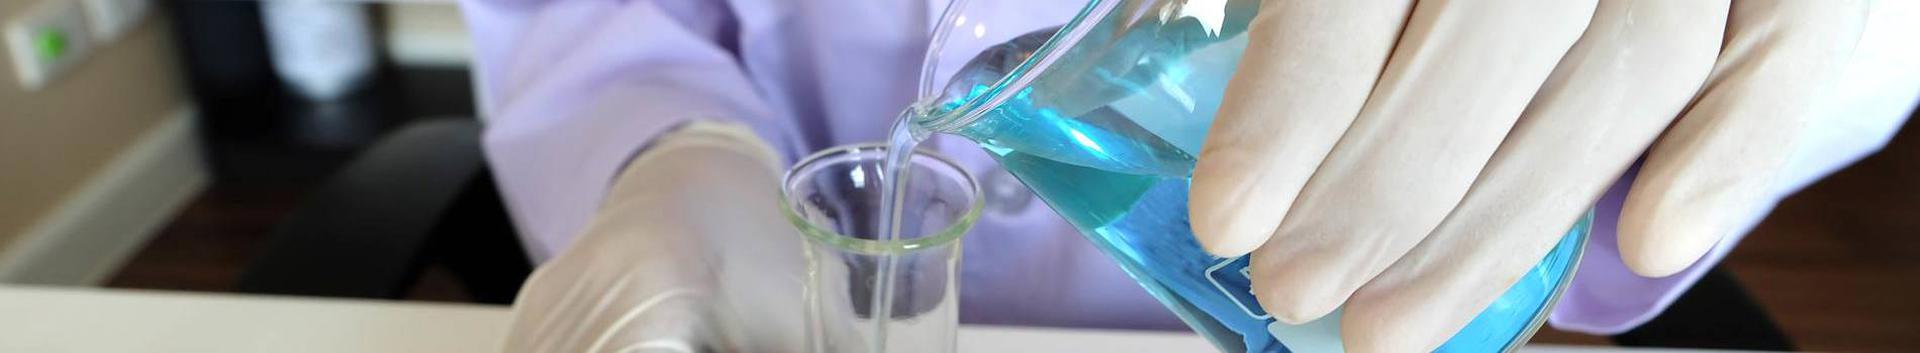 Chemical Industry and other related services, products, consultations